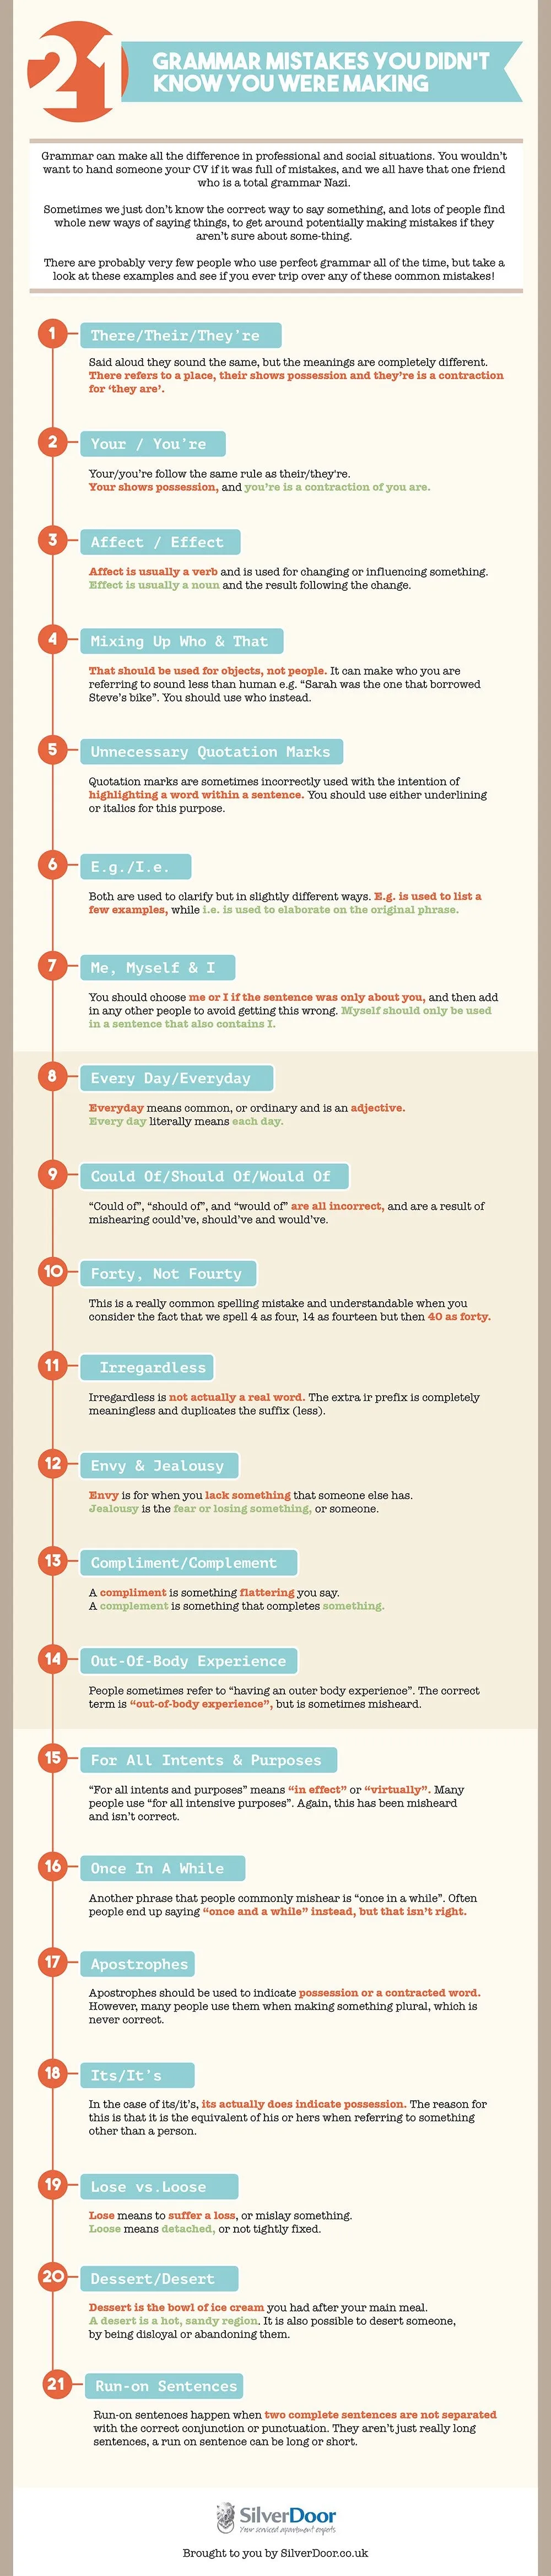 21 Grammar Mistakes You Didn’t Know You Were Making - #Infographic